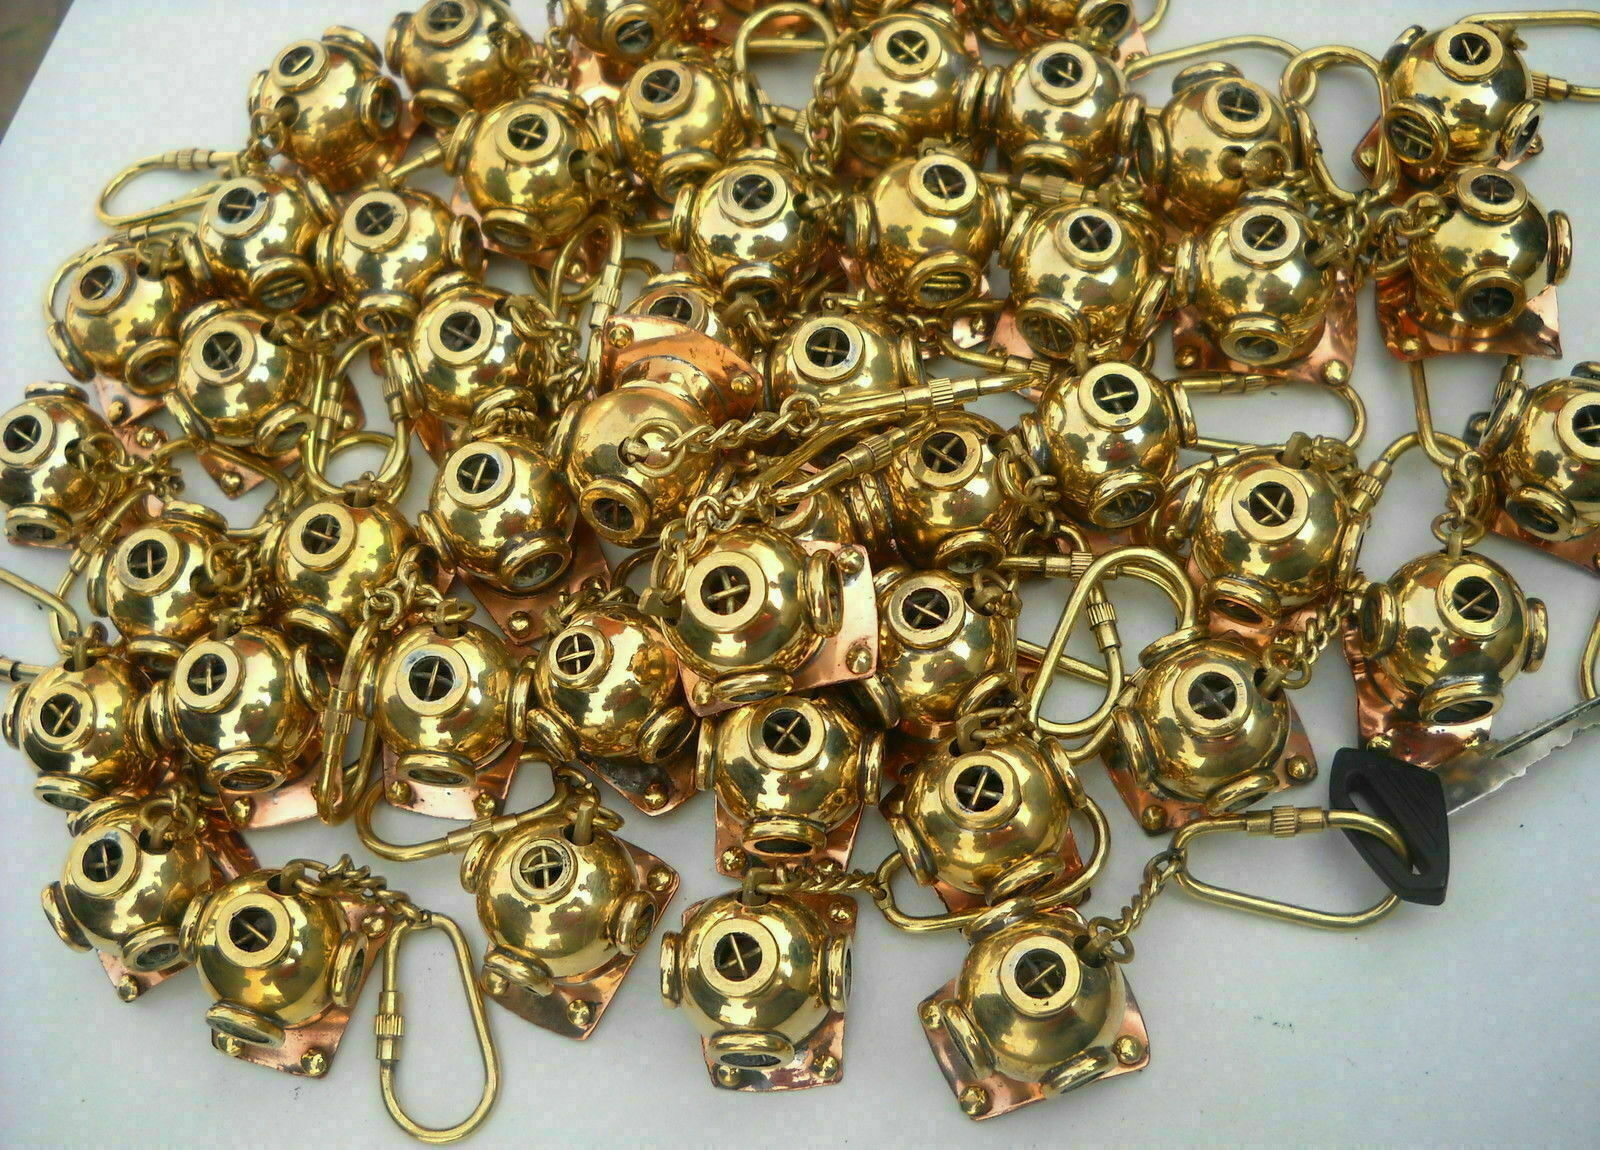 LOT OF 50 Piece Copper Brass Mini Divers Helmet With Key Chain Diving Helmet New